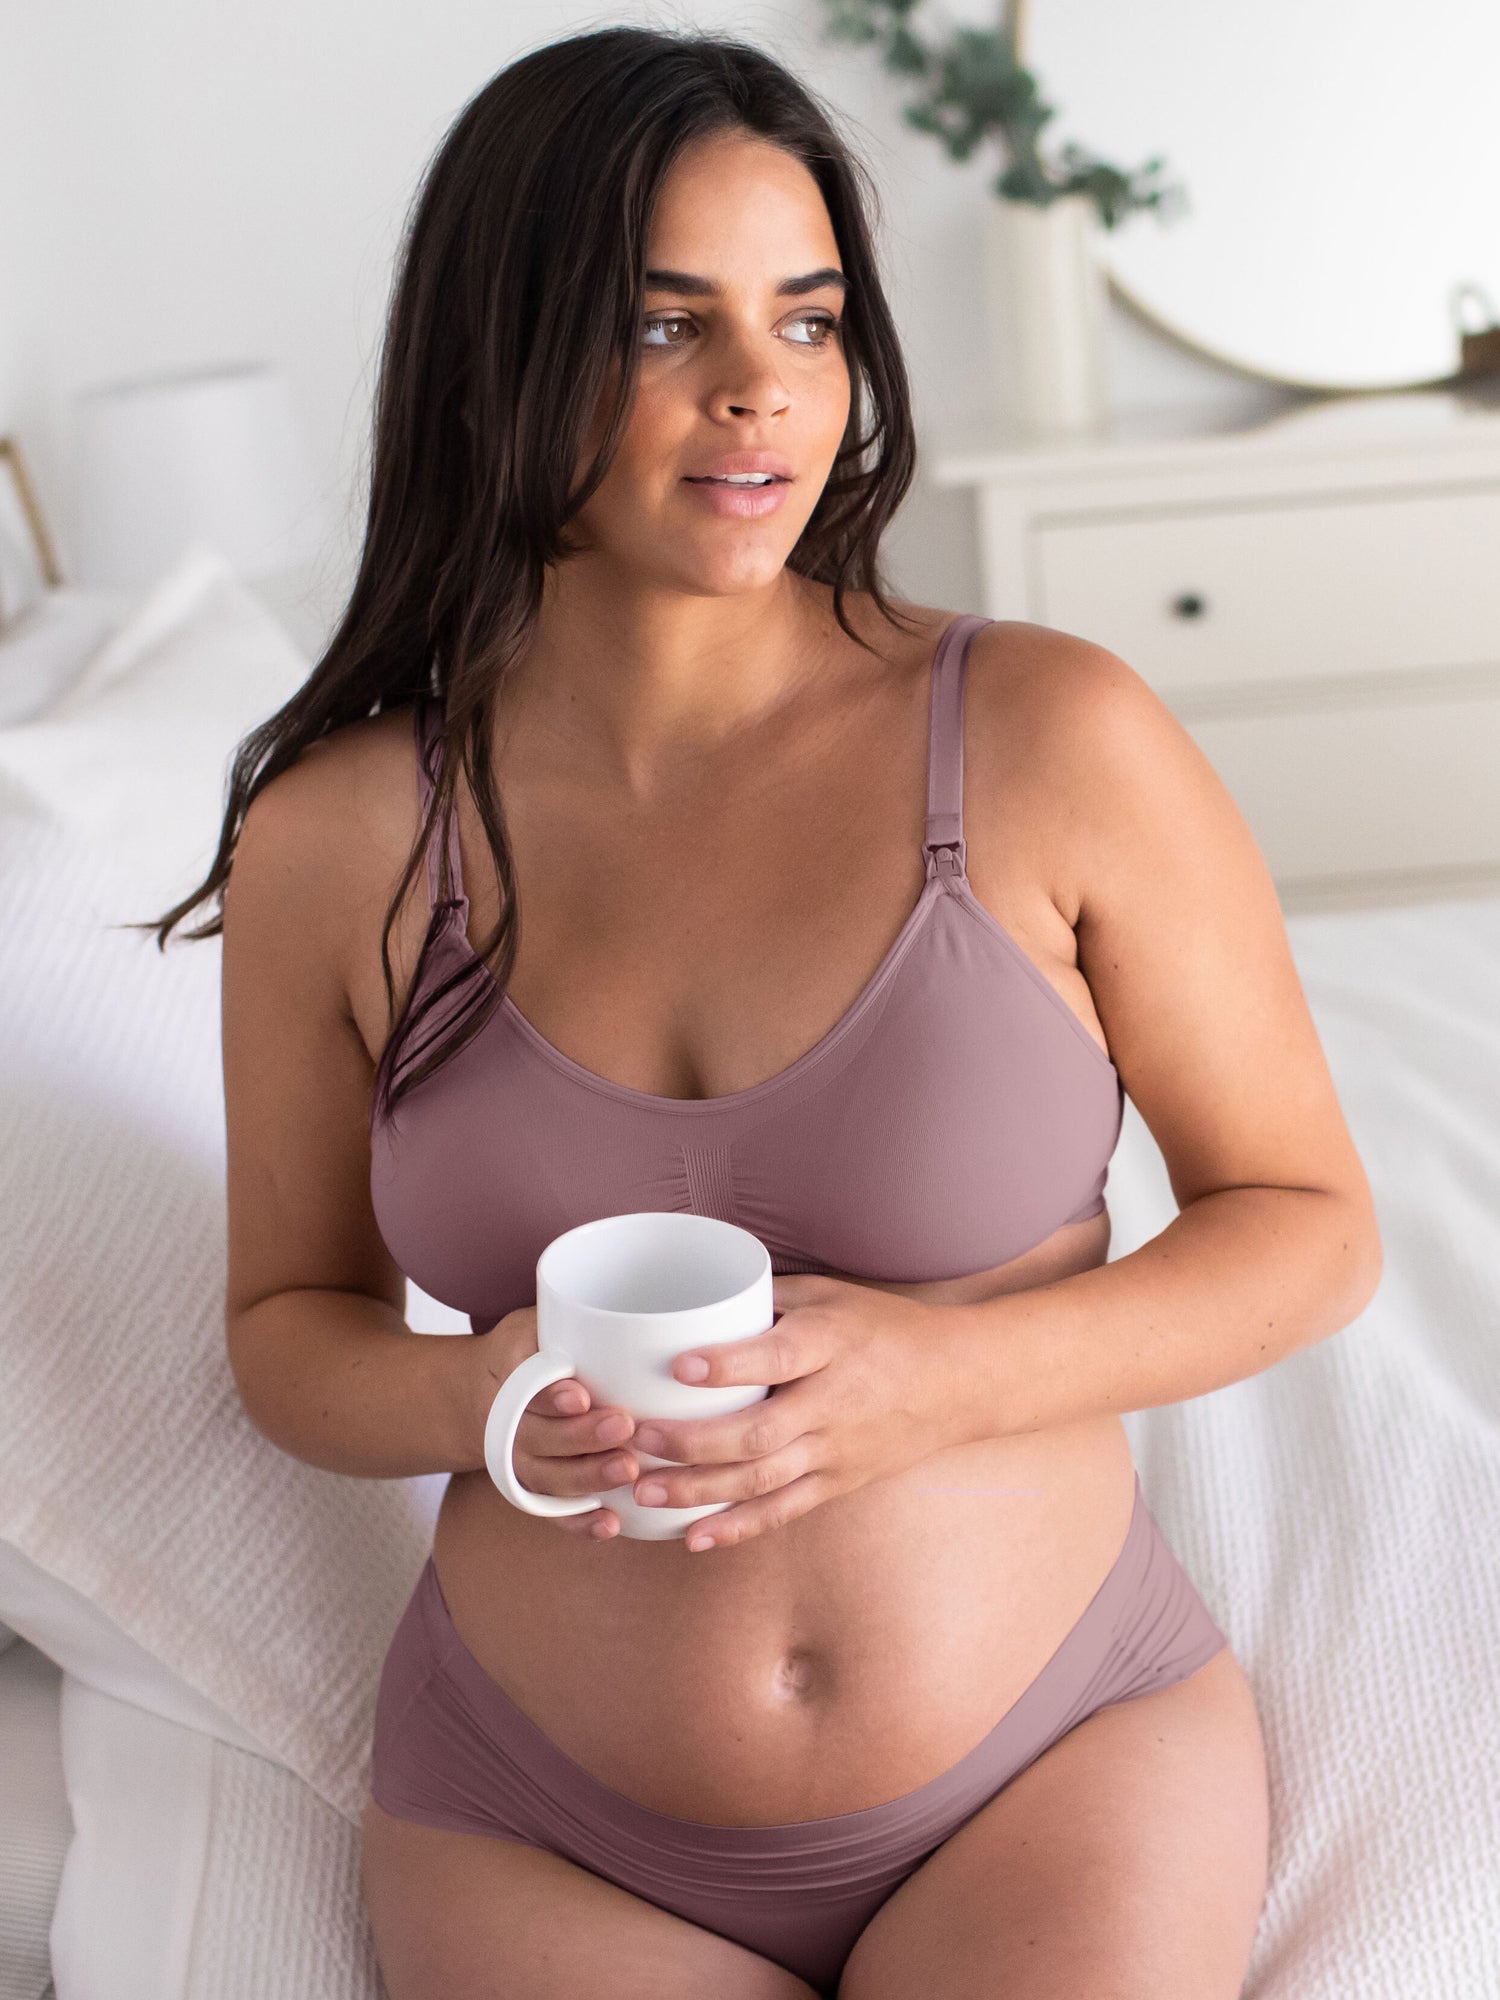 BUYER'S GUIDE 8 essential maternity and nursing bras [Photo